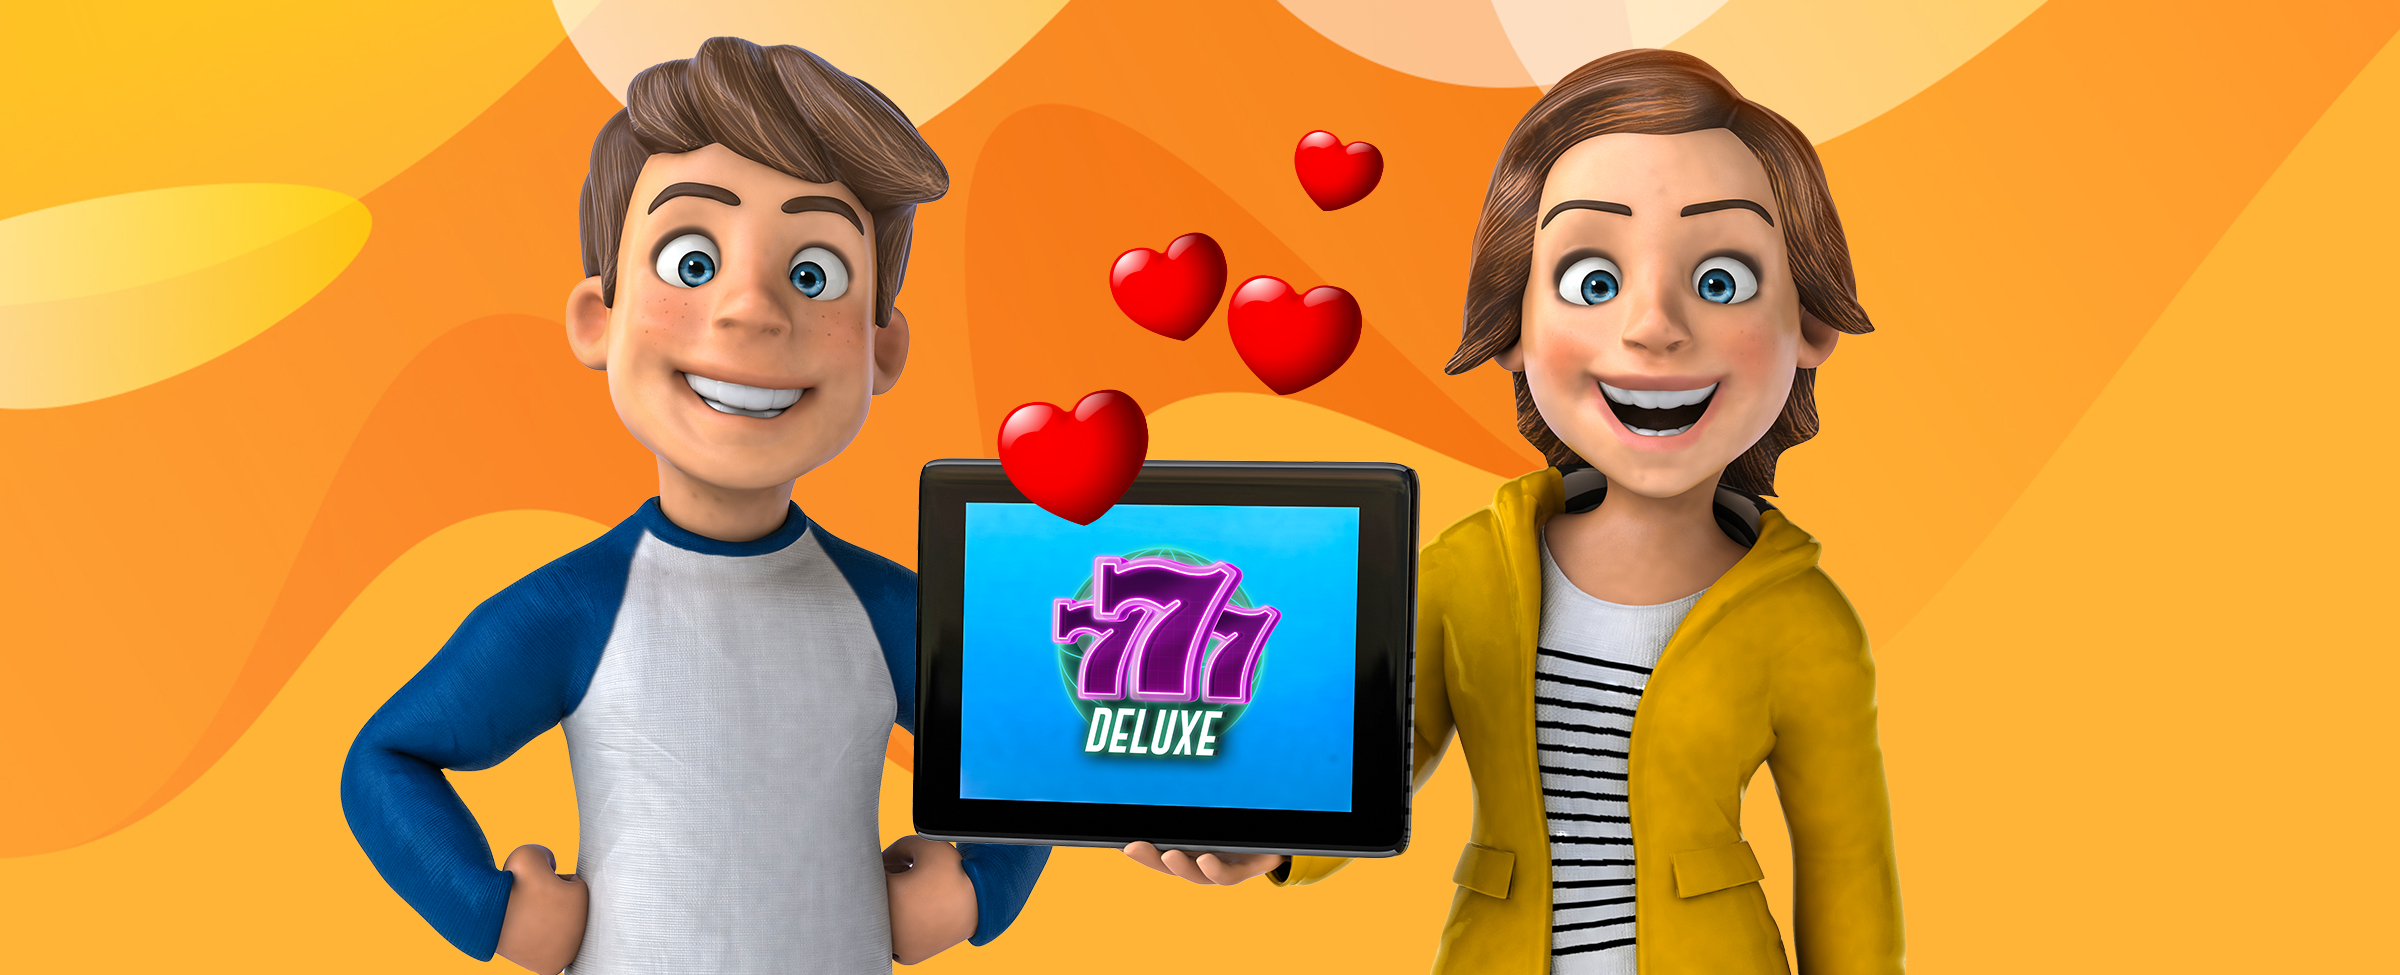 A man and a woman 3D-animated couple stand either side of an iPad they’re holding up, showing the slot logo of 777 Deluxe from SlotsLV, with love hearts bubbling up in the middle of the image.